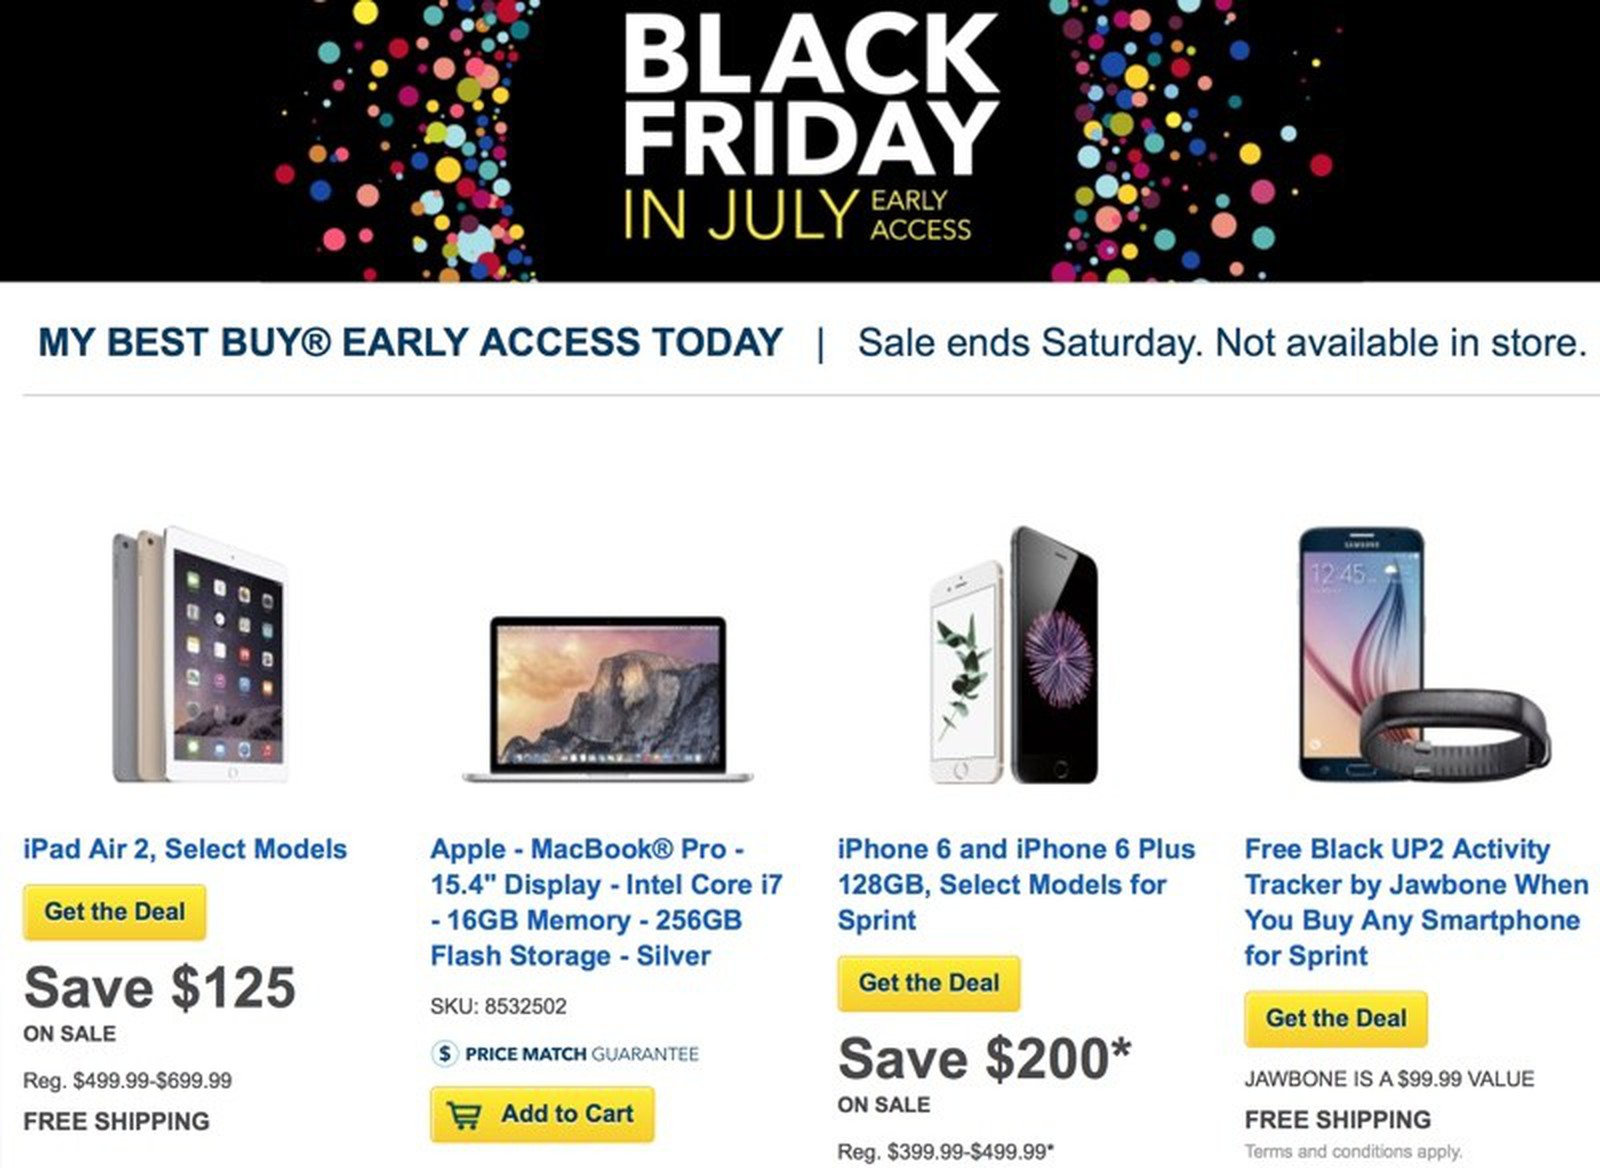 Best Buy Launches Black Friday in July Sale, Discounts iPad Air 2 by - What Ti.come Does Best Buy Open For Black Friday